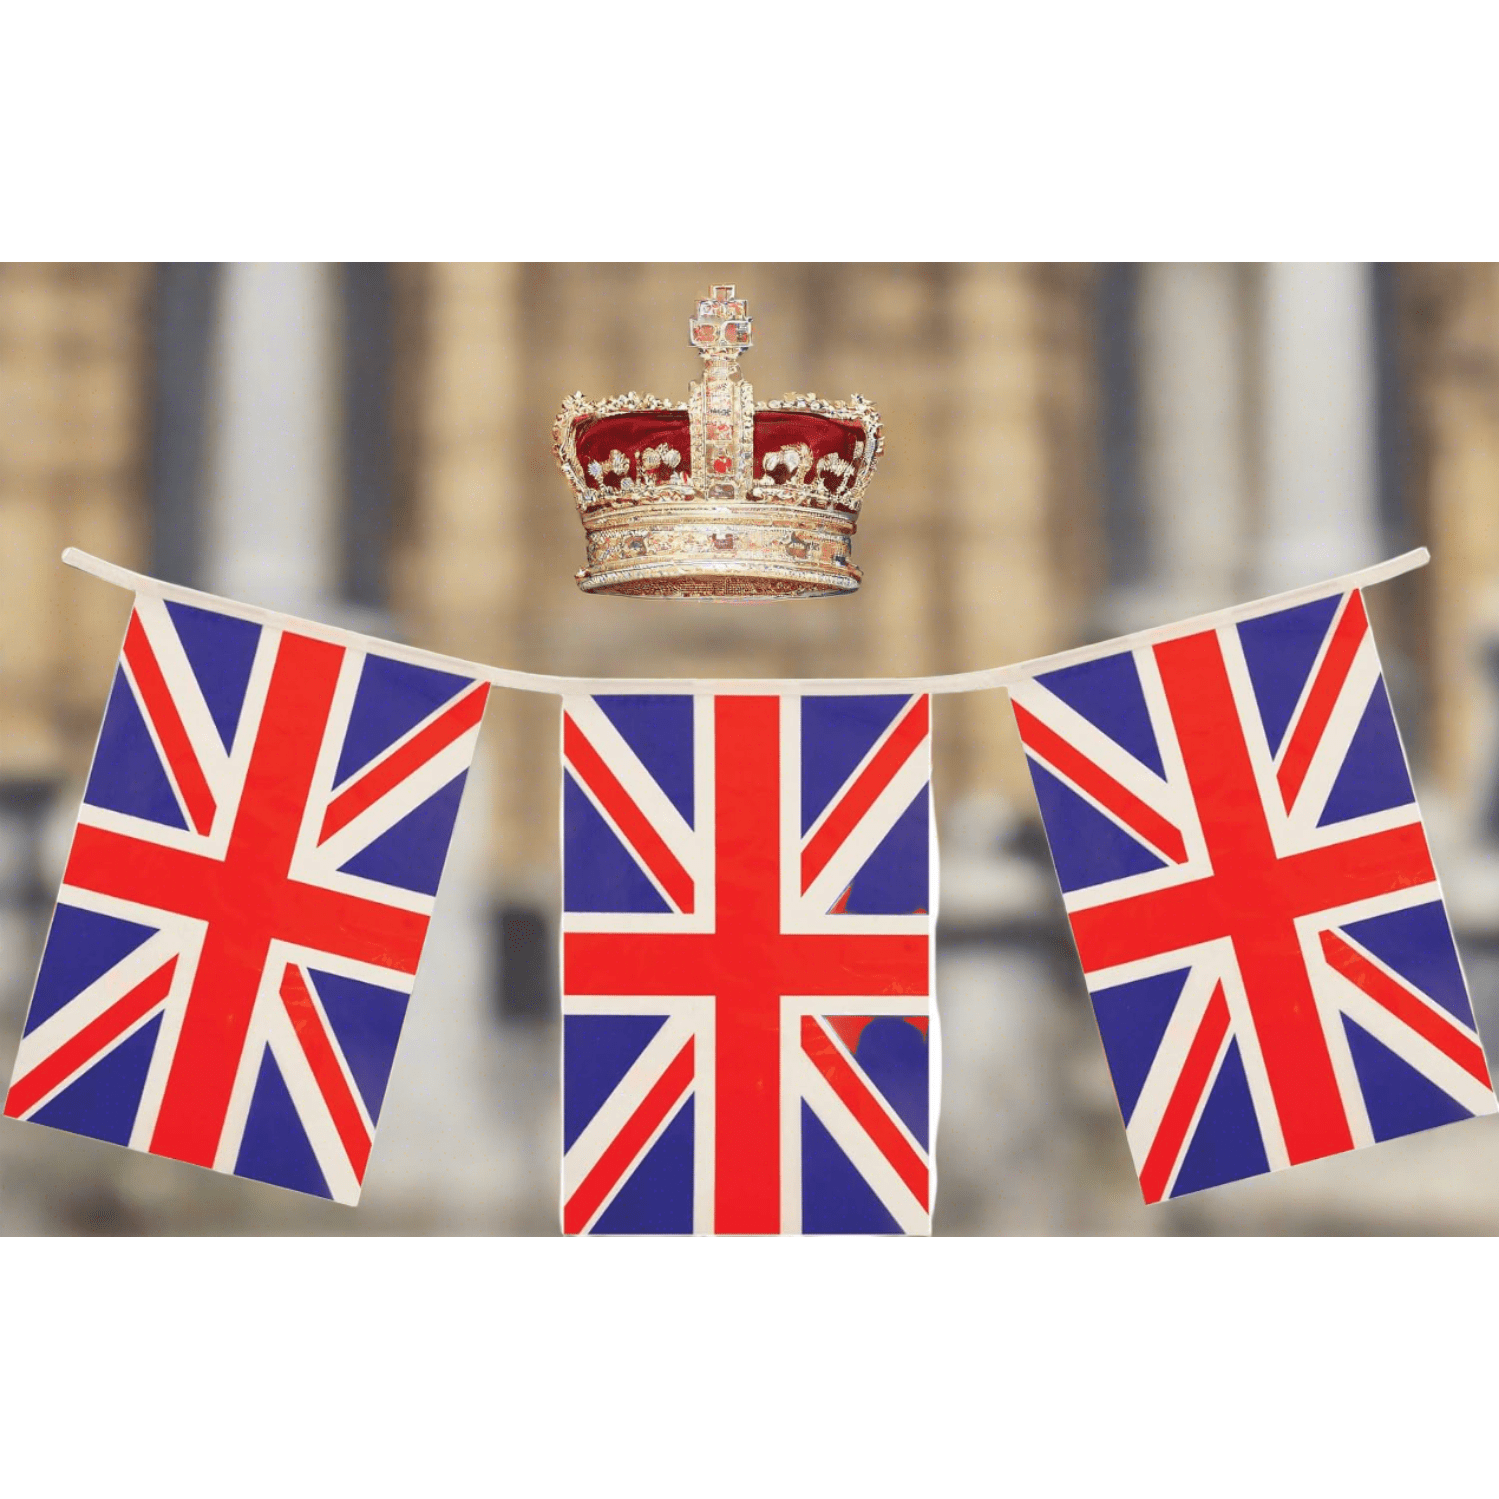 PVC Plastic Bunting 4m Union Jack Party 11 Flags | Merthyr Tydfil | Why Not Shop Online